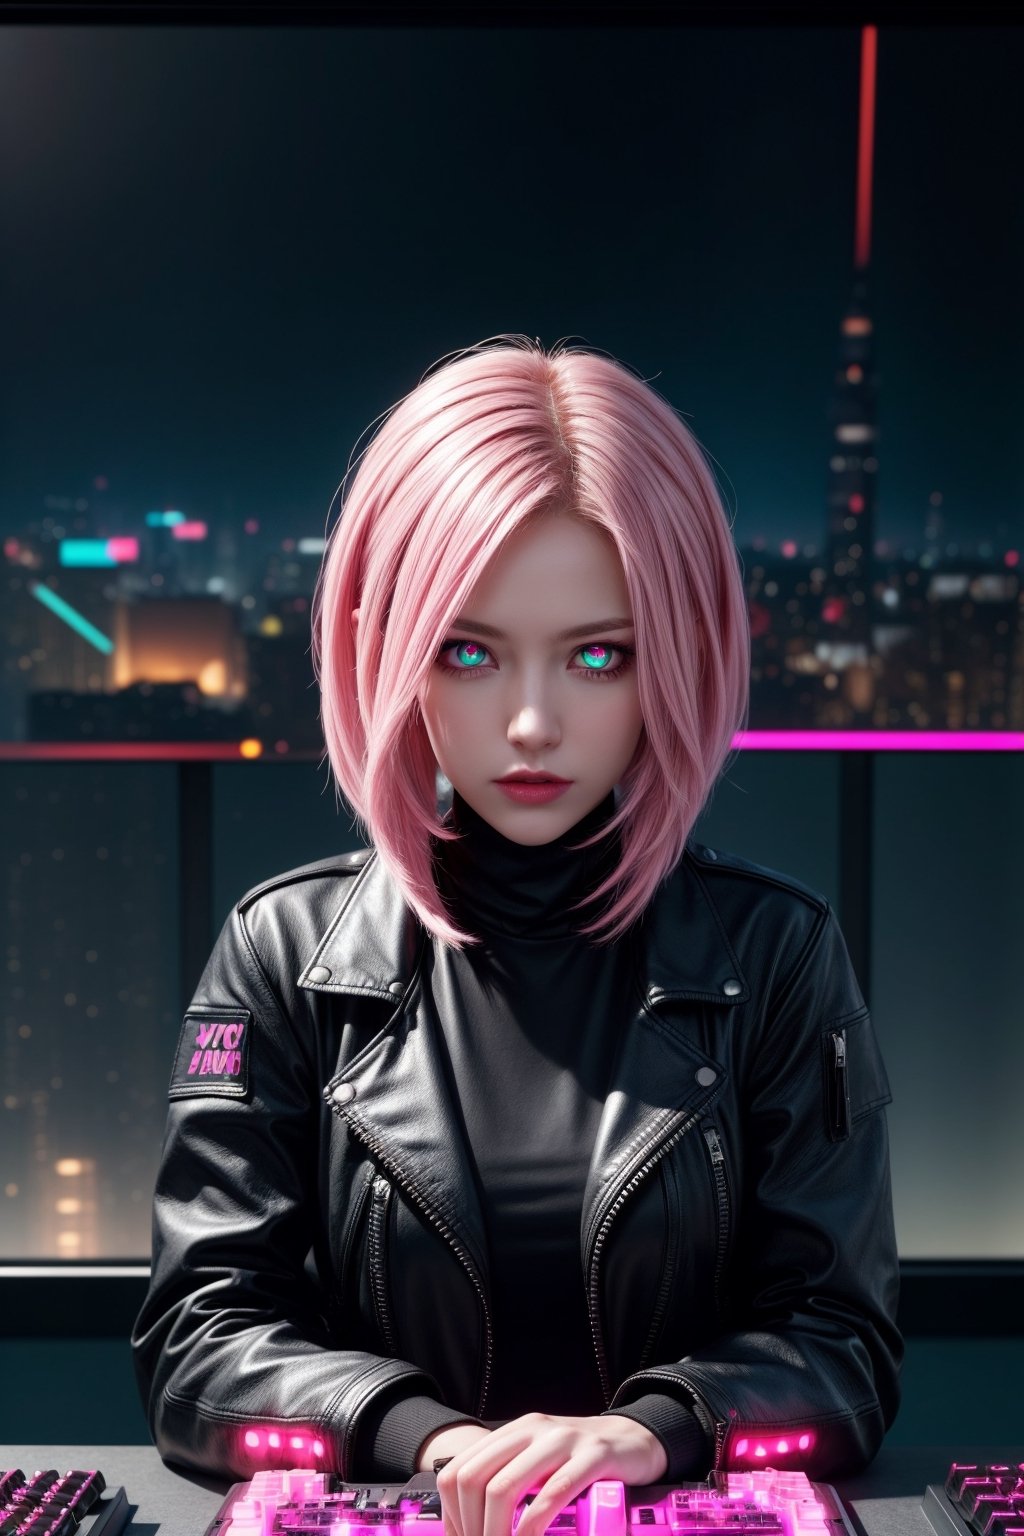 (masterpiece, high resolution, CGI, official art:1.2), (skilled female hacker:1.3) with (short, spiky neon pink hair:1.1) and (glowing blue cybernetic eye implants:1.2), wearing a (black leather jacket:1.2) with (intricate neon circuitry patterns:1.1), holding a (customized cyberdeck:1.4), intense atmosphere, focused emotion, futuristic tone, high intensity, inspired by sci-fi and cyberpunk, dark aesthetic, neon color palette with (vibrant pink accents:1.1), dynamic mood, dramatic spotlighting, diagonal shot, looking directly at the viewer with a sense of determination, surrounded by (hacking screens:1.2) and (cityscape backgrounds:1.1), focal point on the hacker's face, highly realistic metal texture, atmospheric smoke effect, high image complexity, detailed environment, subtle movement of the hacker's fingers, energetic pose.